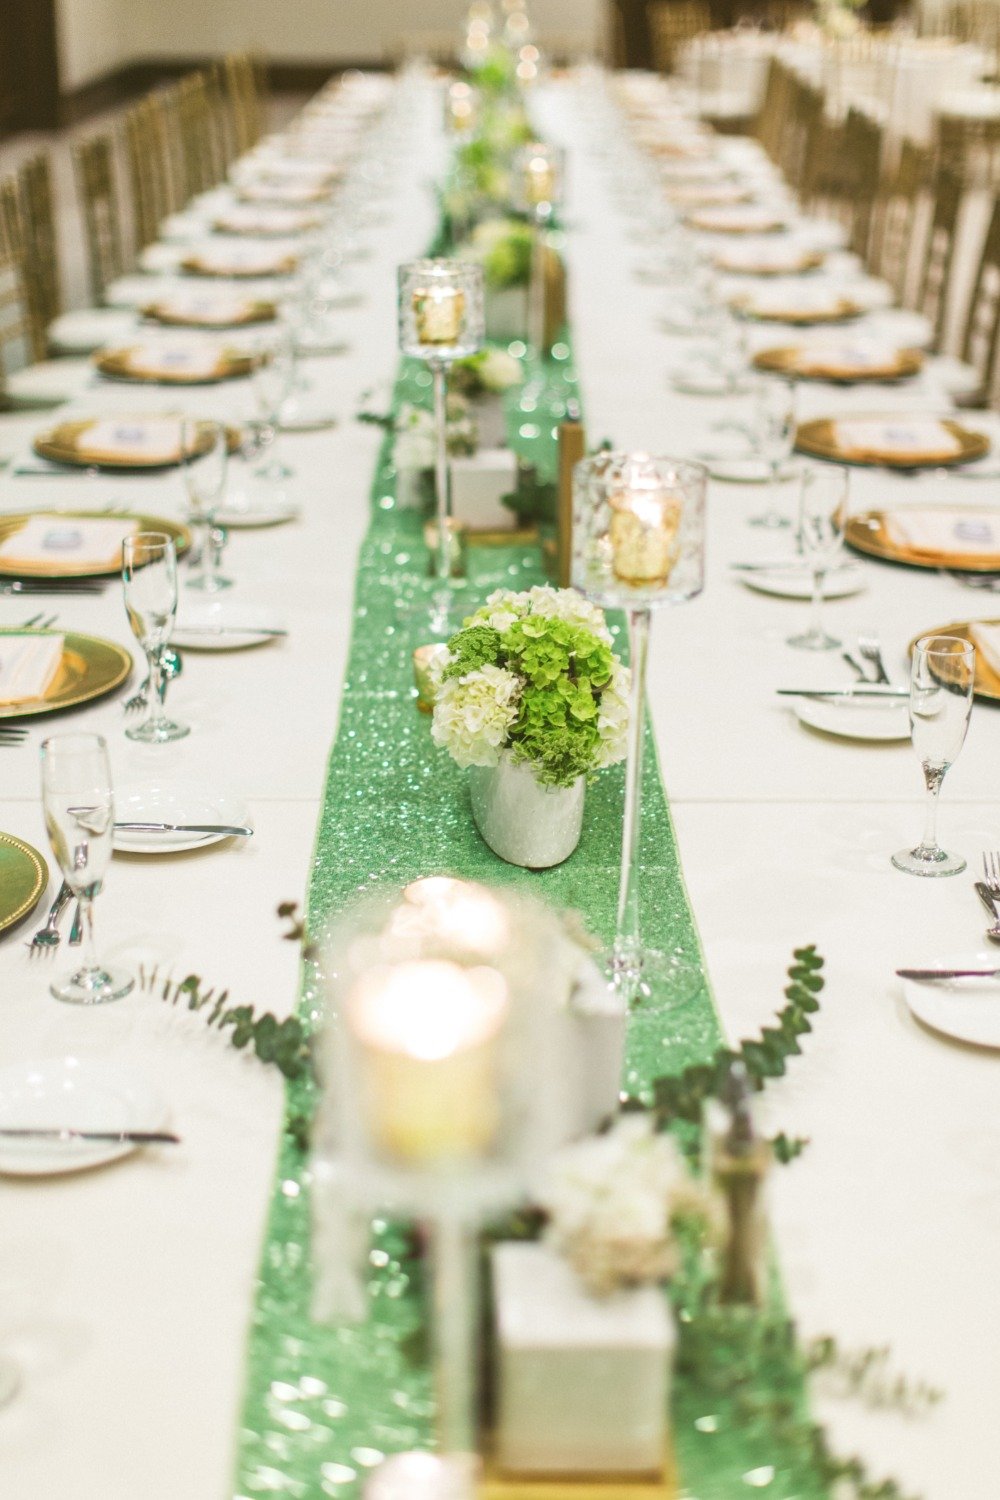 Sparkly teal table runner